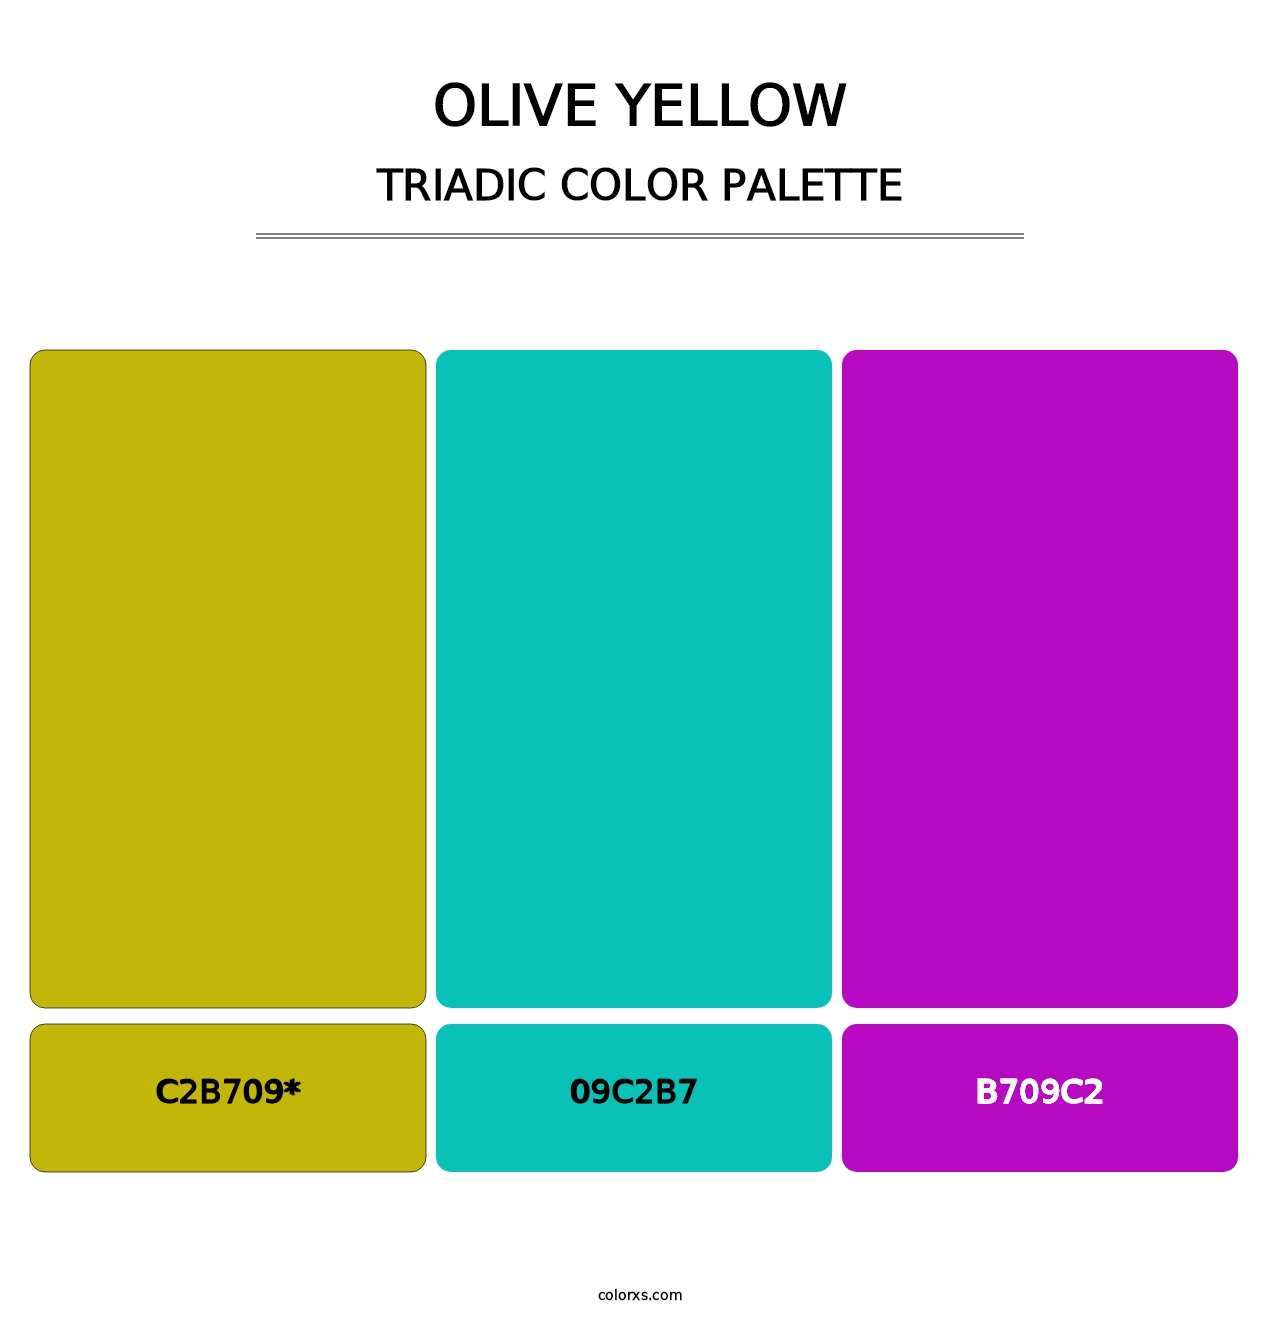 Olive Yellow - Triadic Color Palette